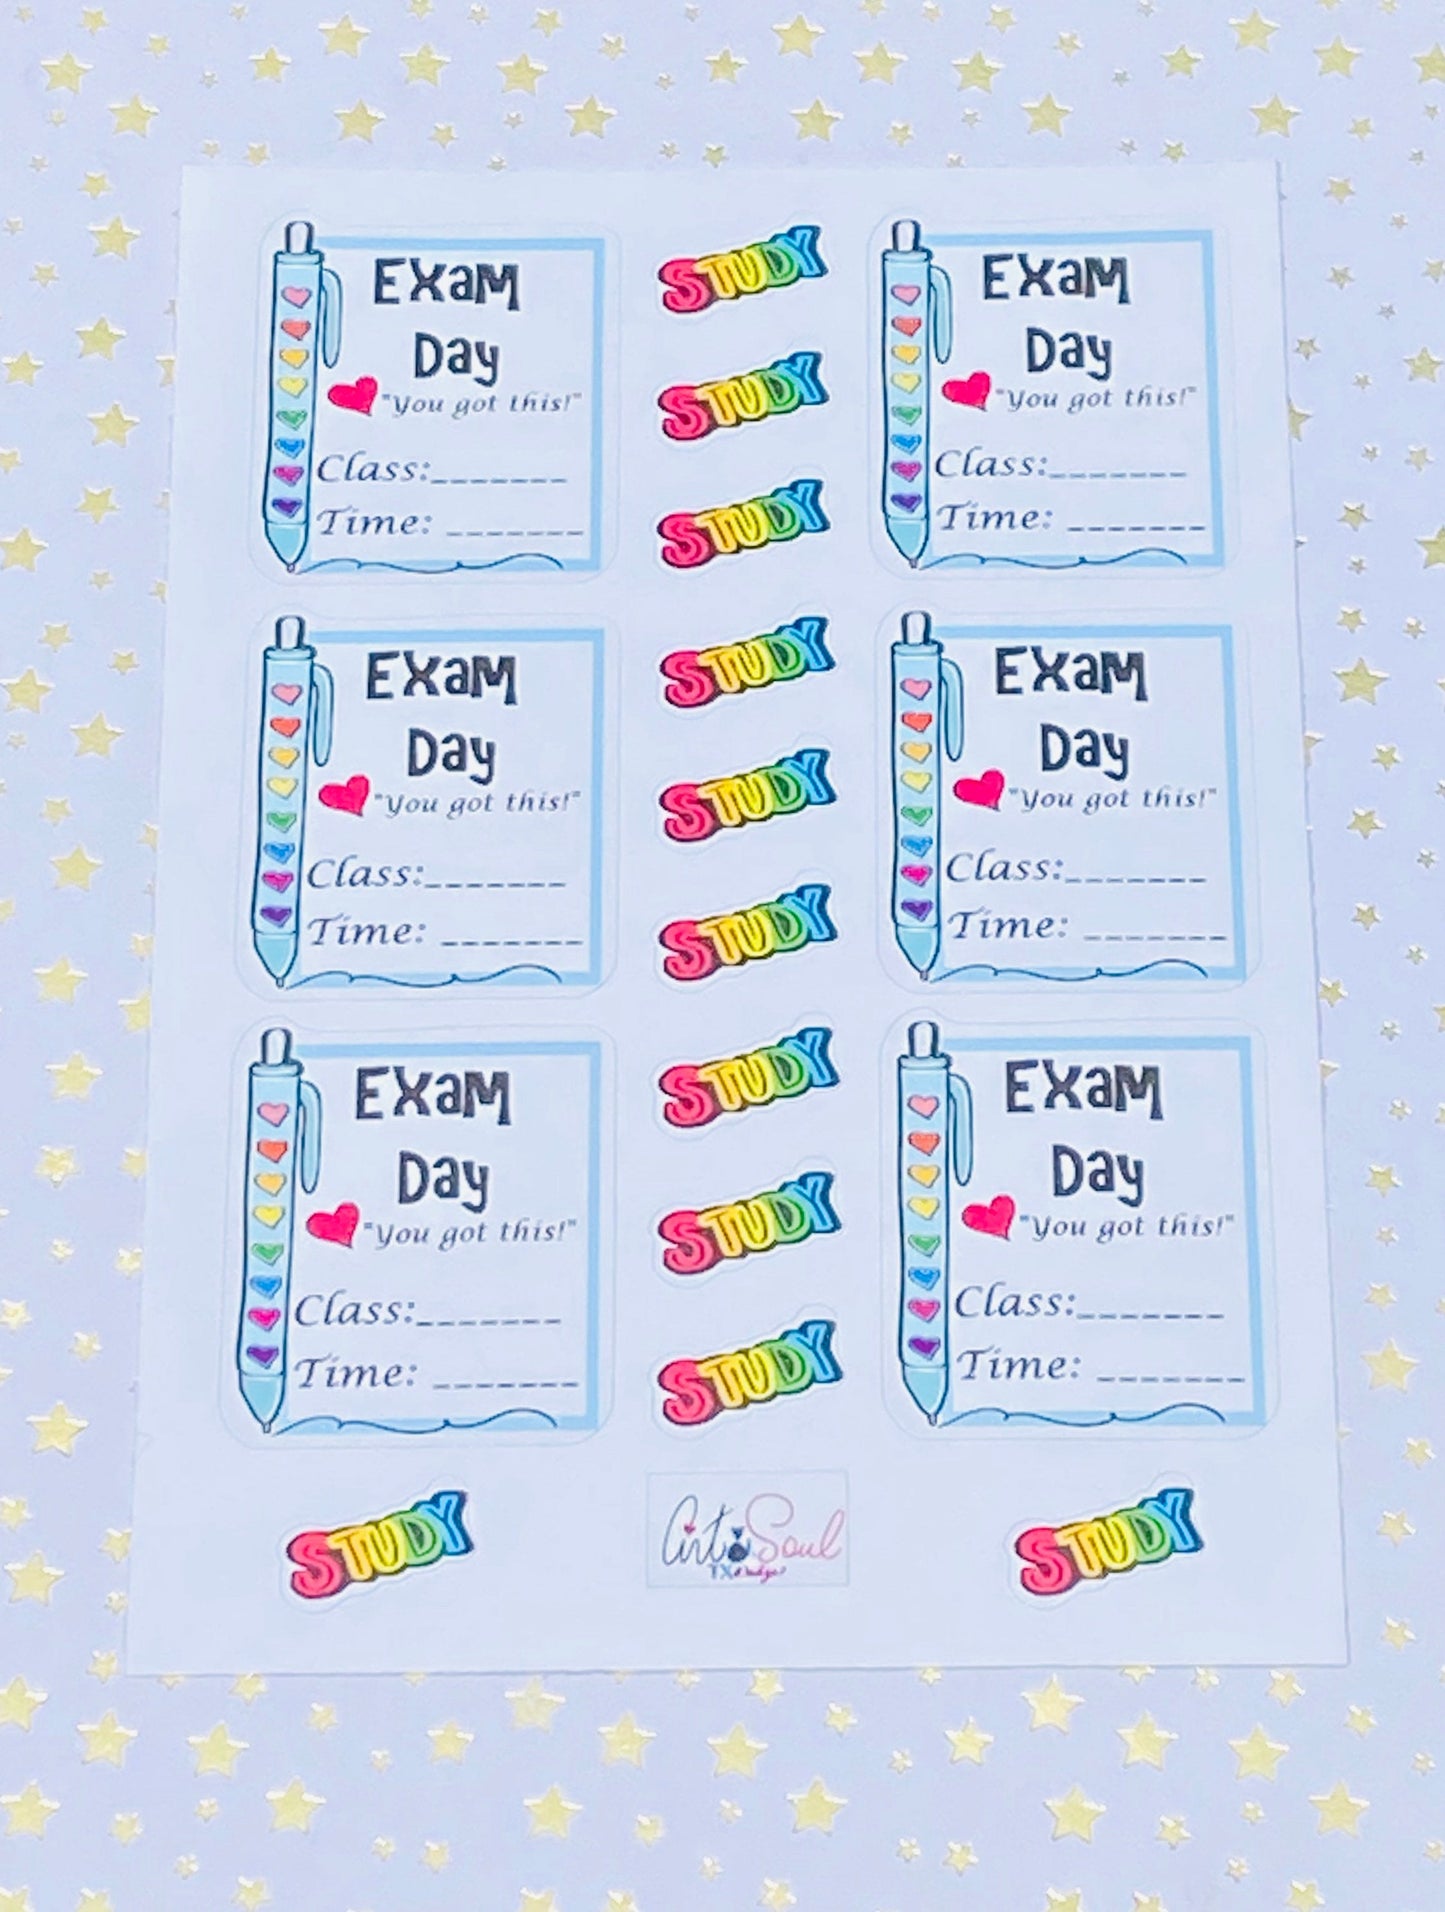 Each sheet comes with 6 Exam Day stickers and 11 Study stickers.